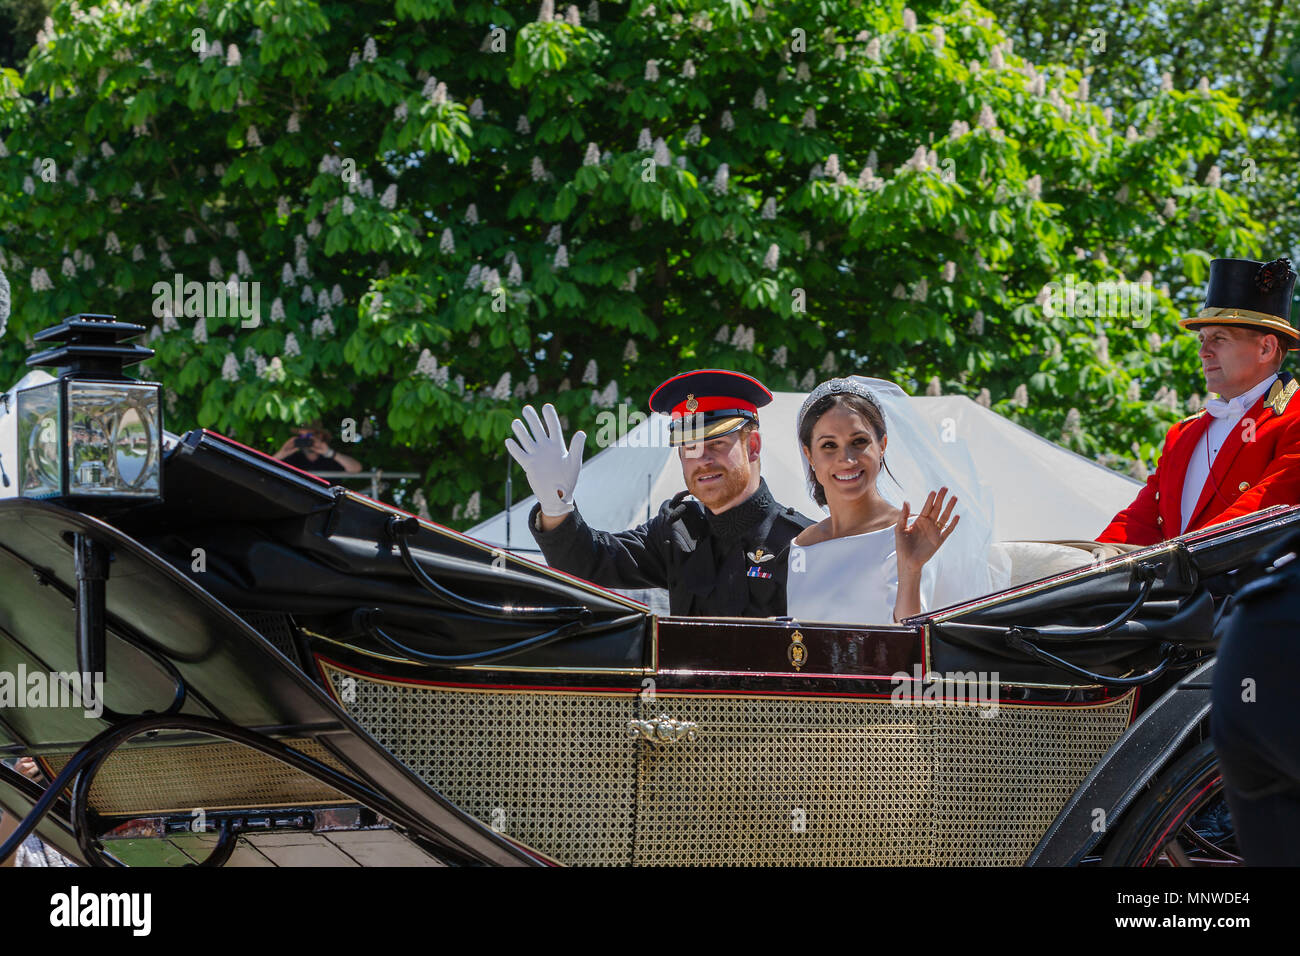 Prince harry and Meghan Markel, in the carriage after their wedding ceremony royal wedding, Windsor, prince harry, Stock Photo